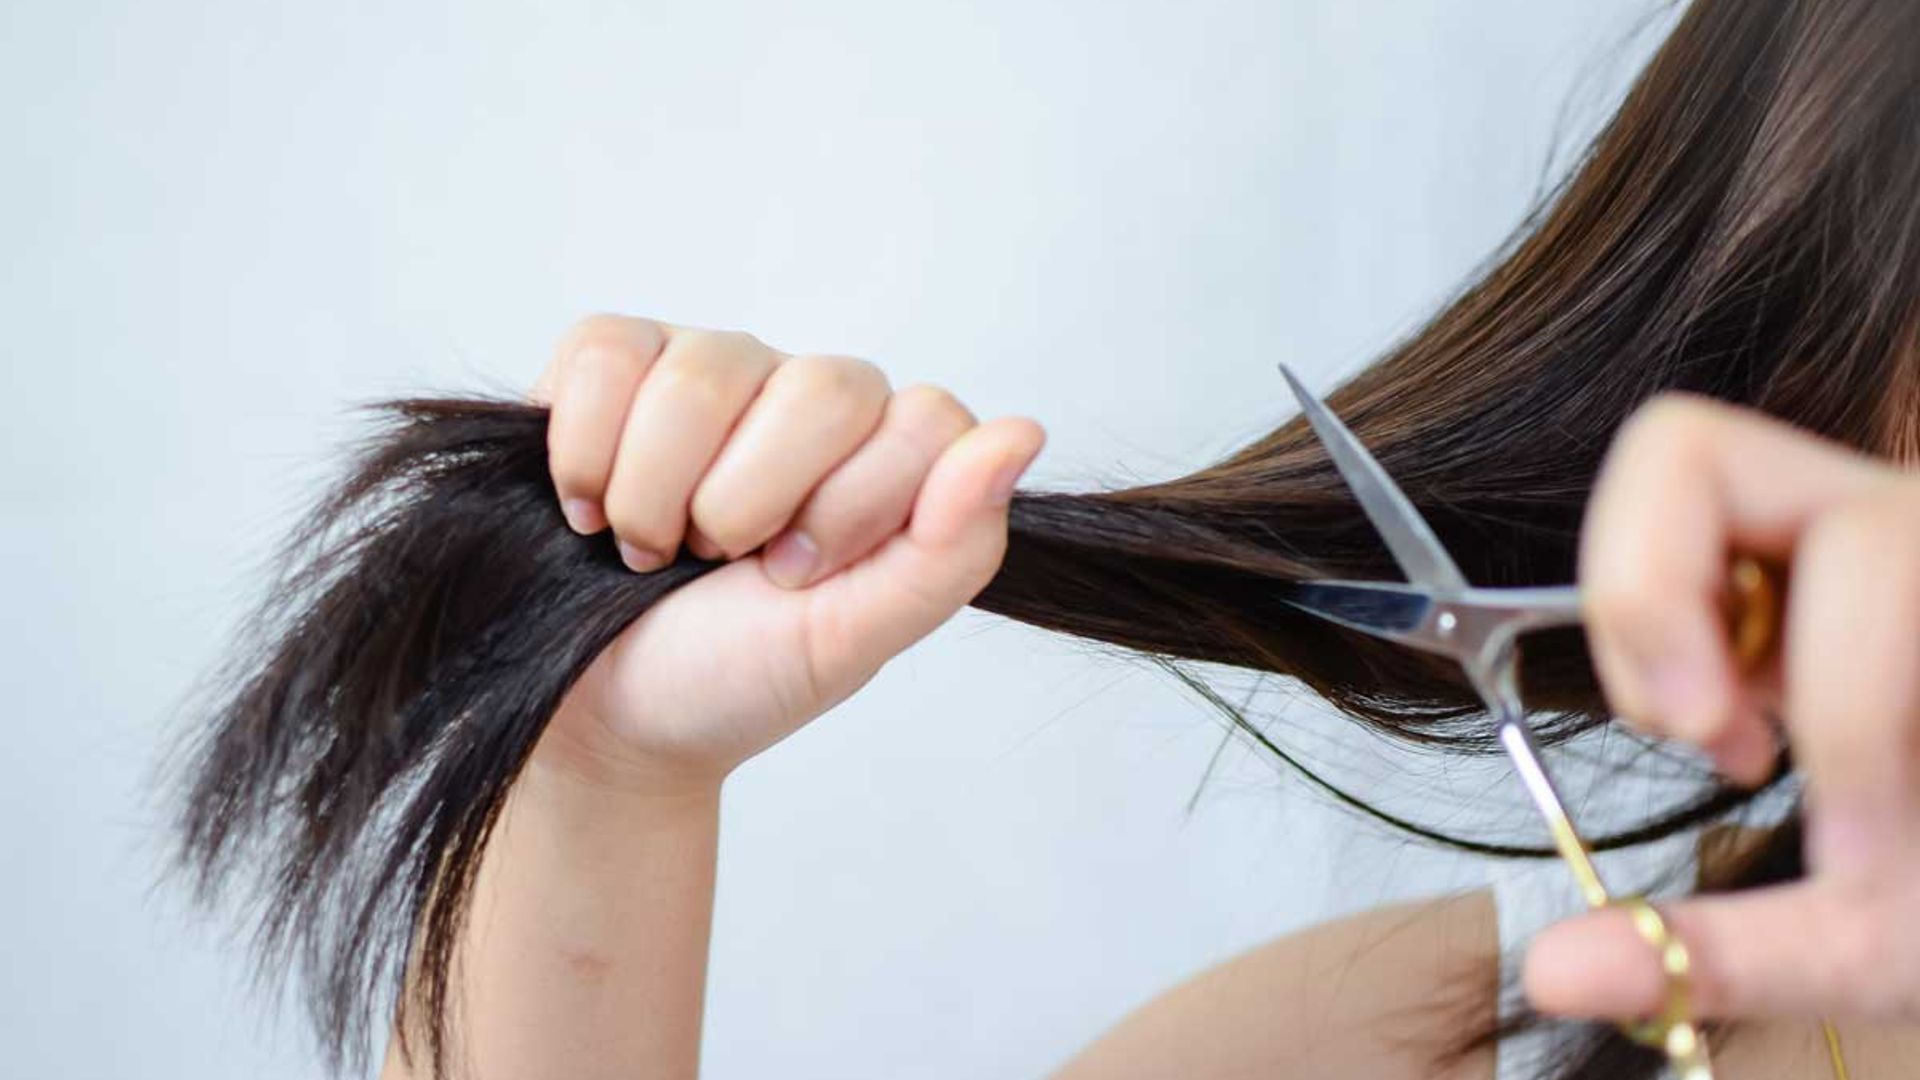 How to cut your own hair at home during lockdown: Experts share their